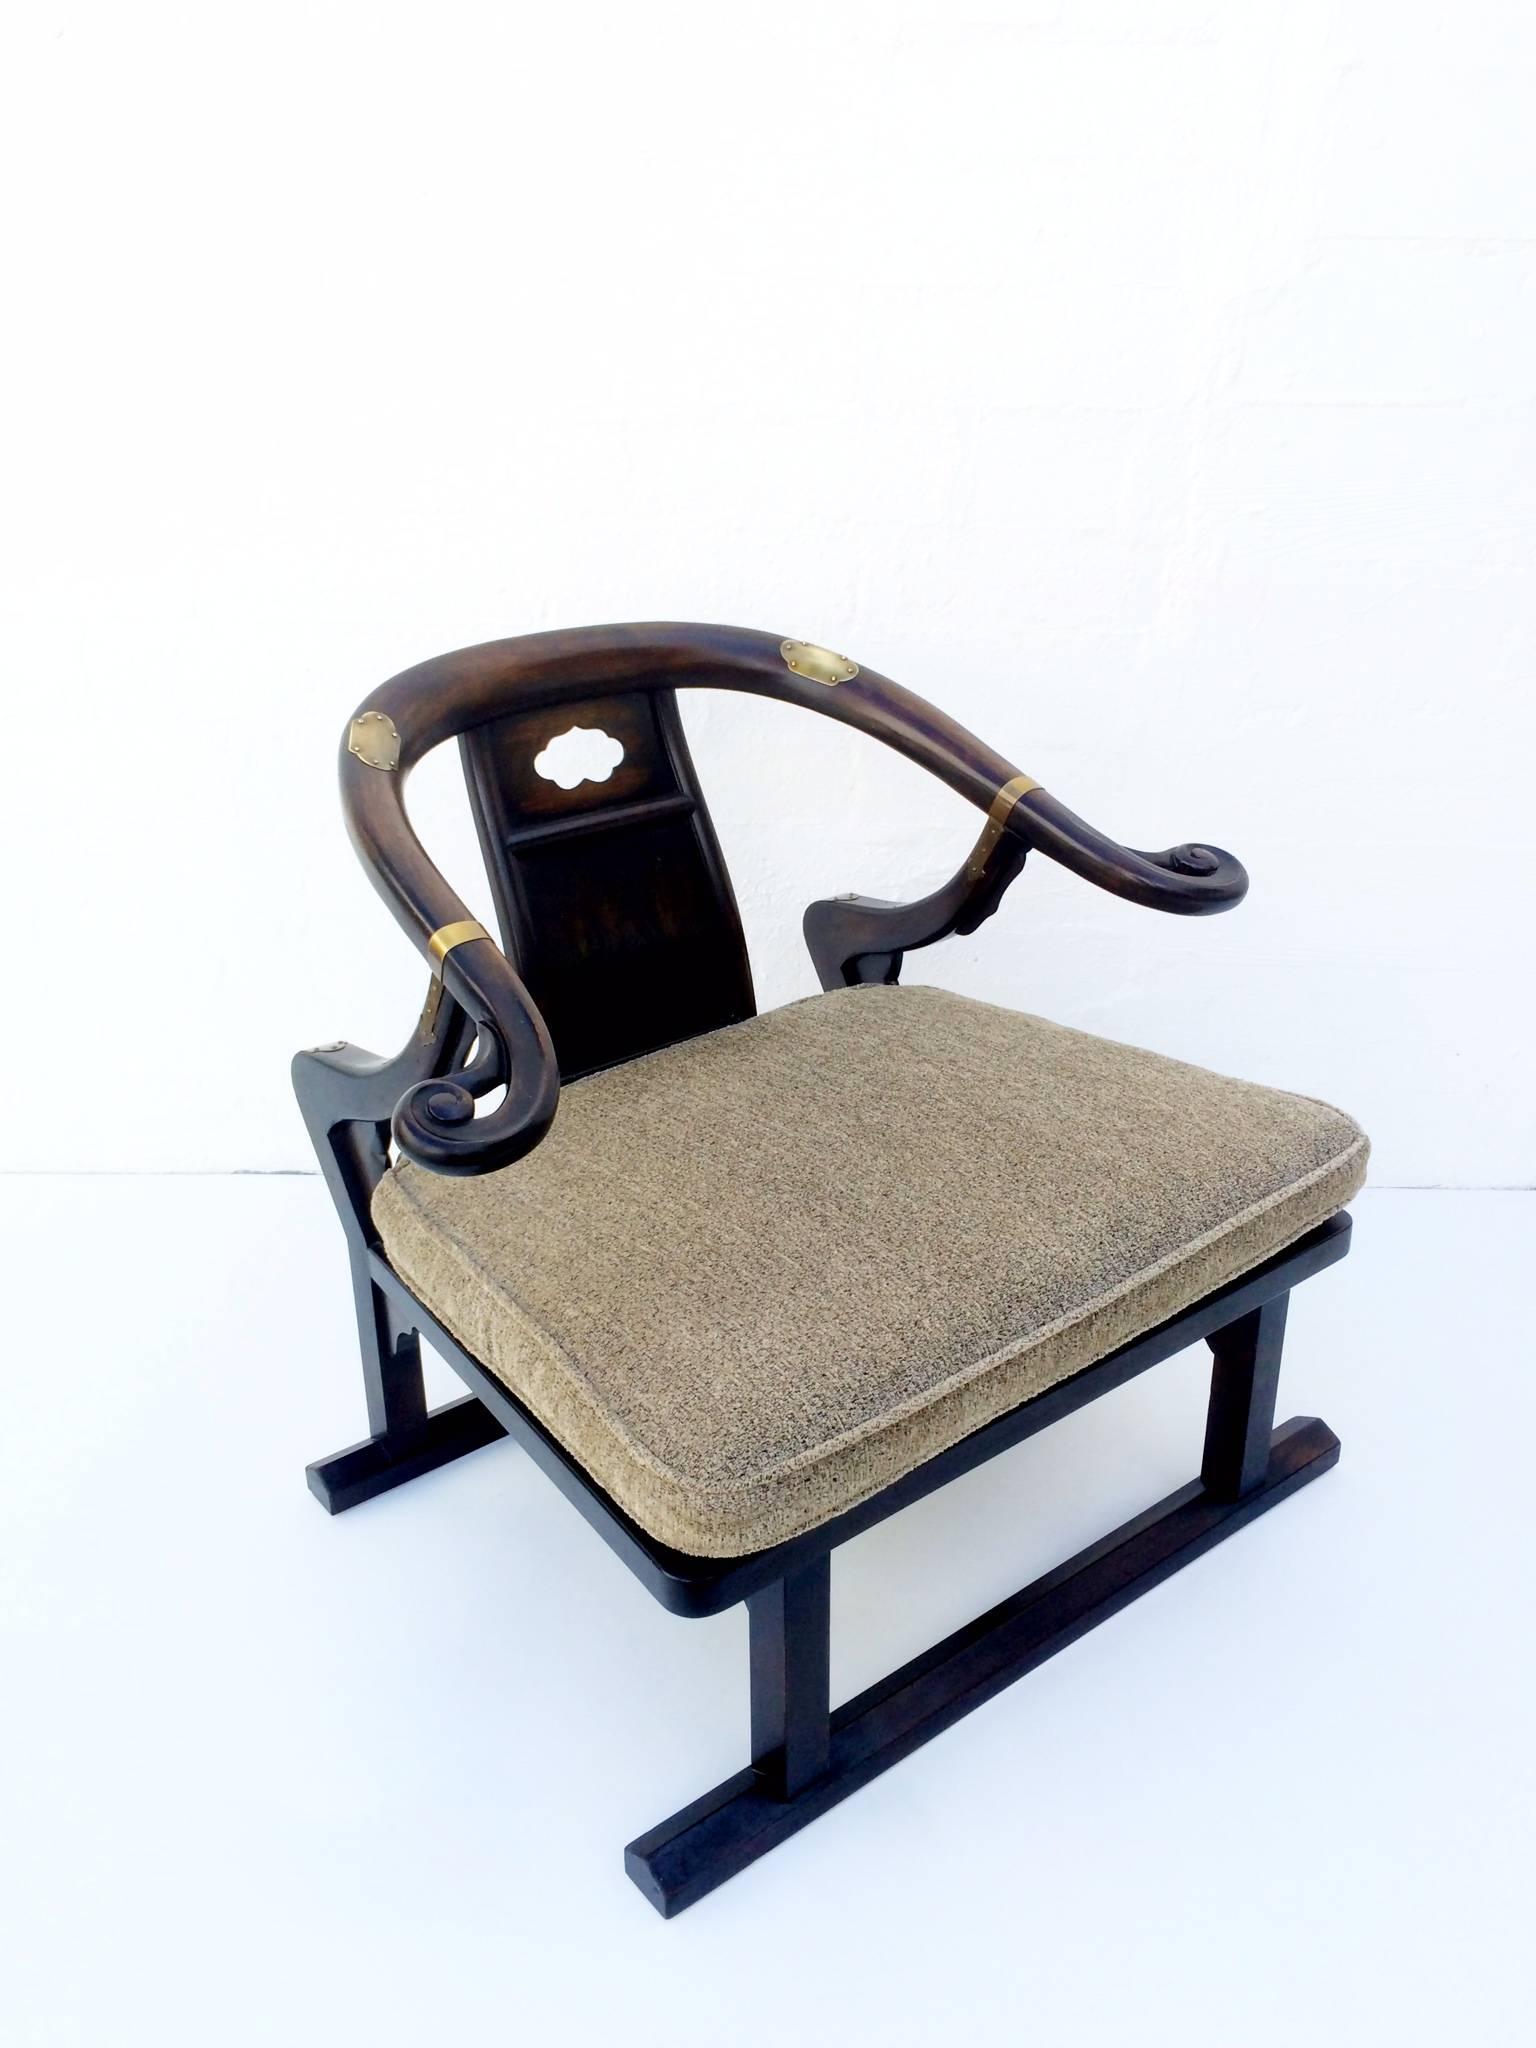 1950s dark walnut lounge chair  by Bakers furniture company's Far East collection.